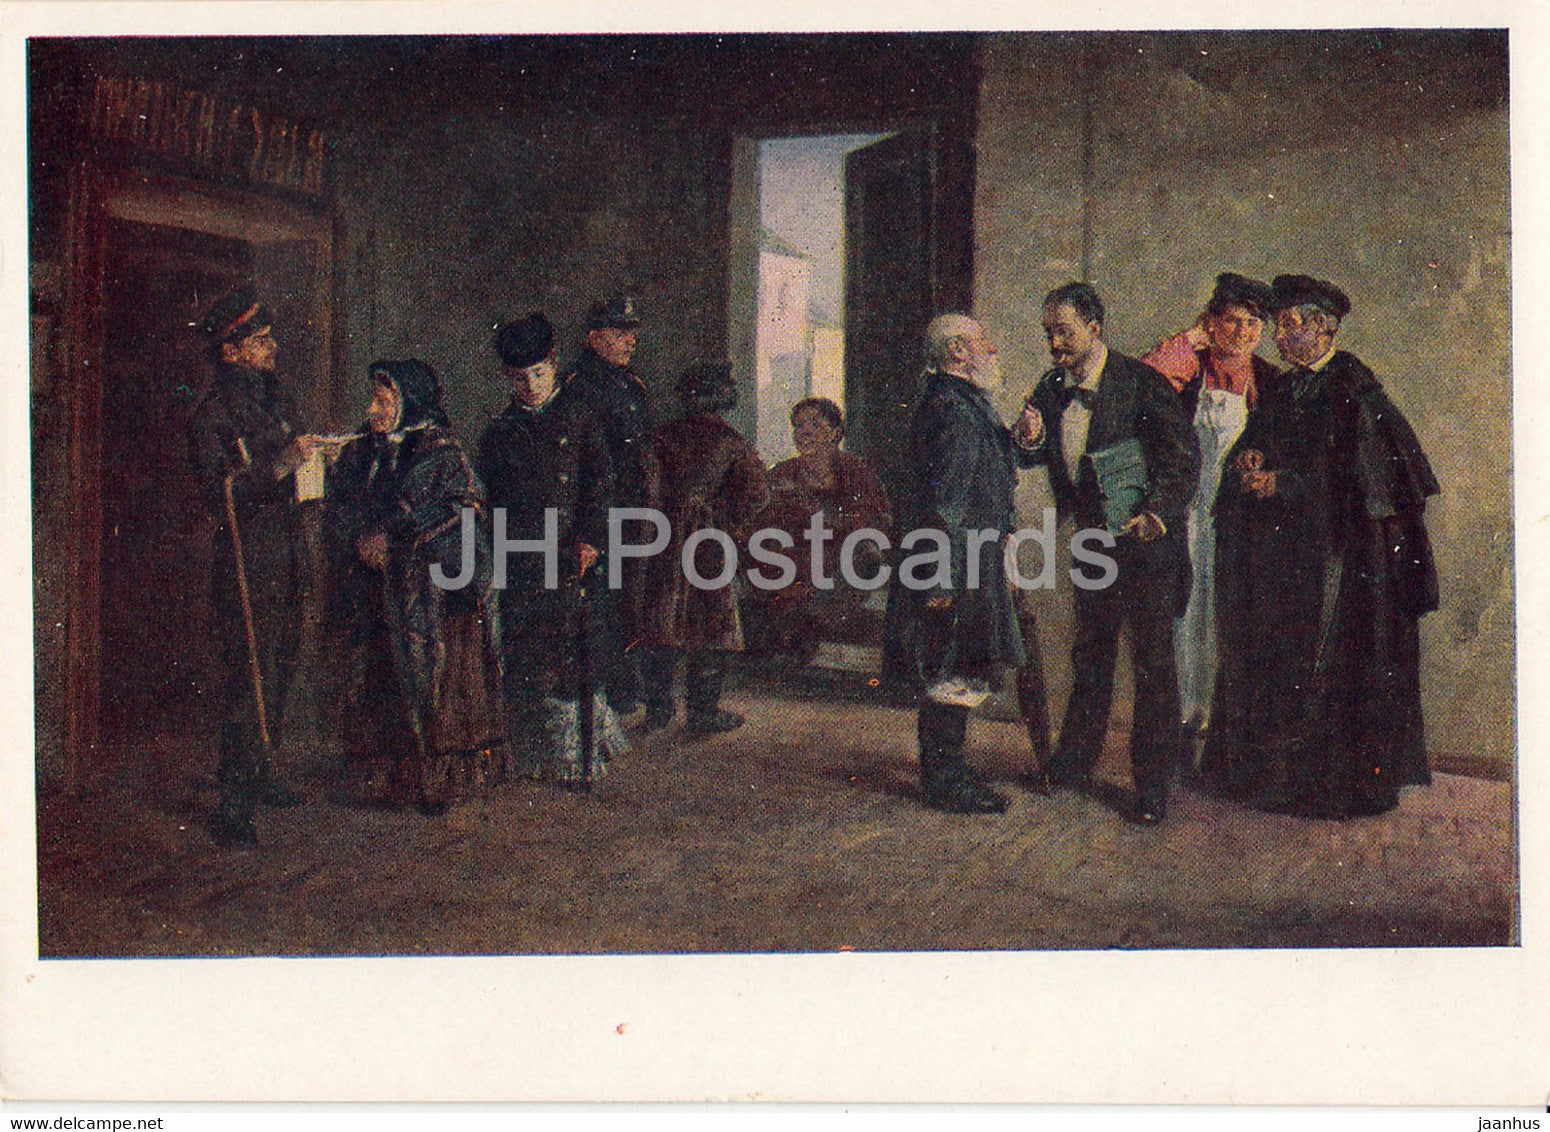 painting by V. Makovsky - In the magistrate's cell - Russian art - 1962 - Russia USSR - unused - JH Postcards